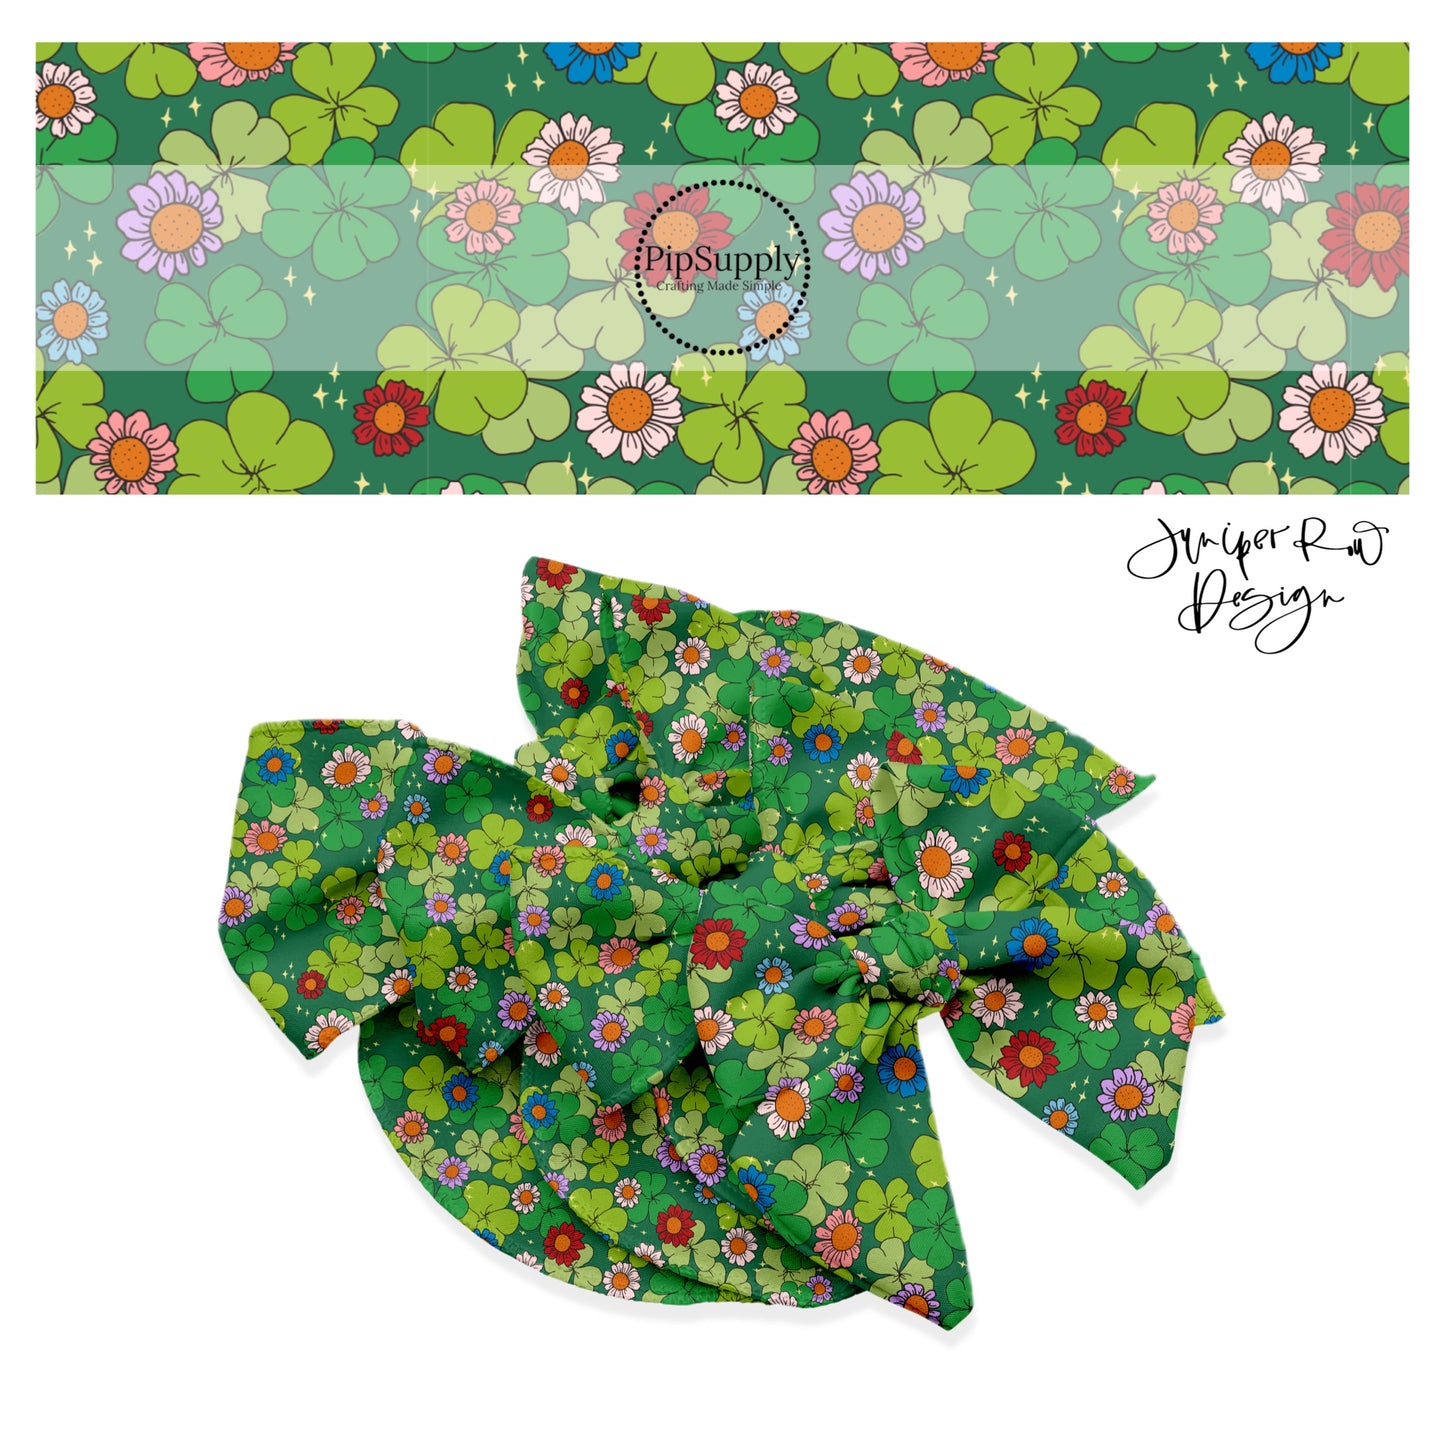 Green clovers with pink, red, and blue sunflowers with gold stars on a green bow strip